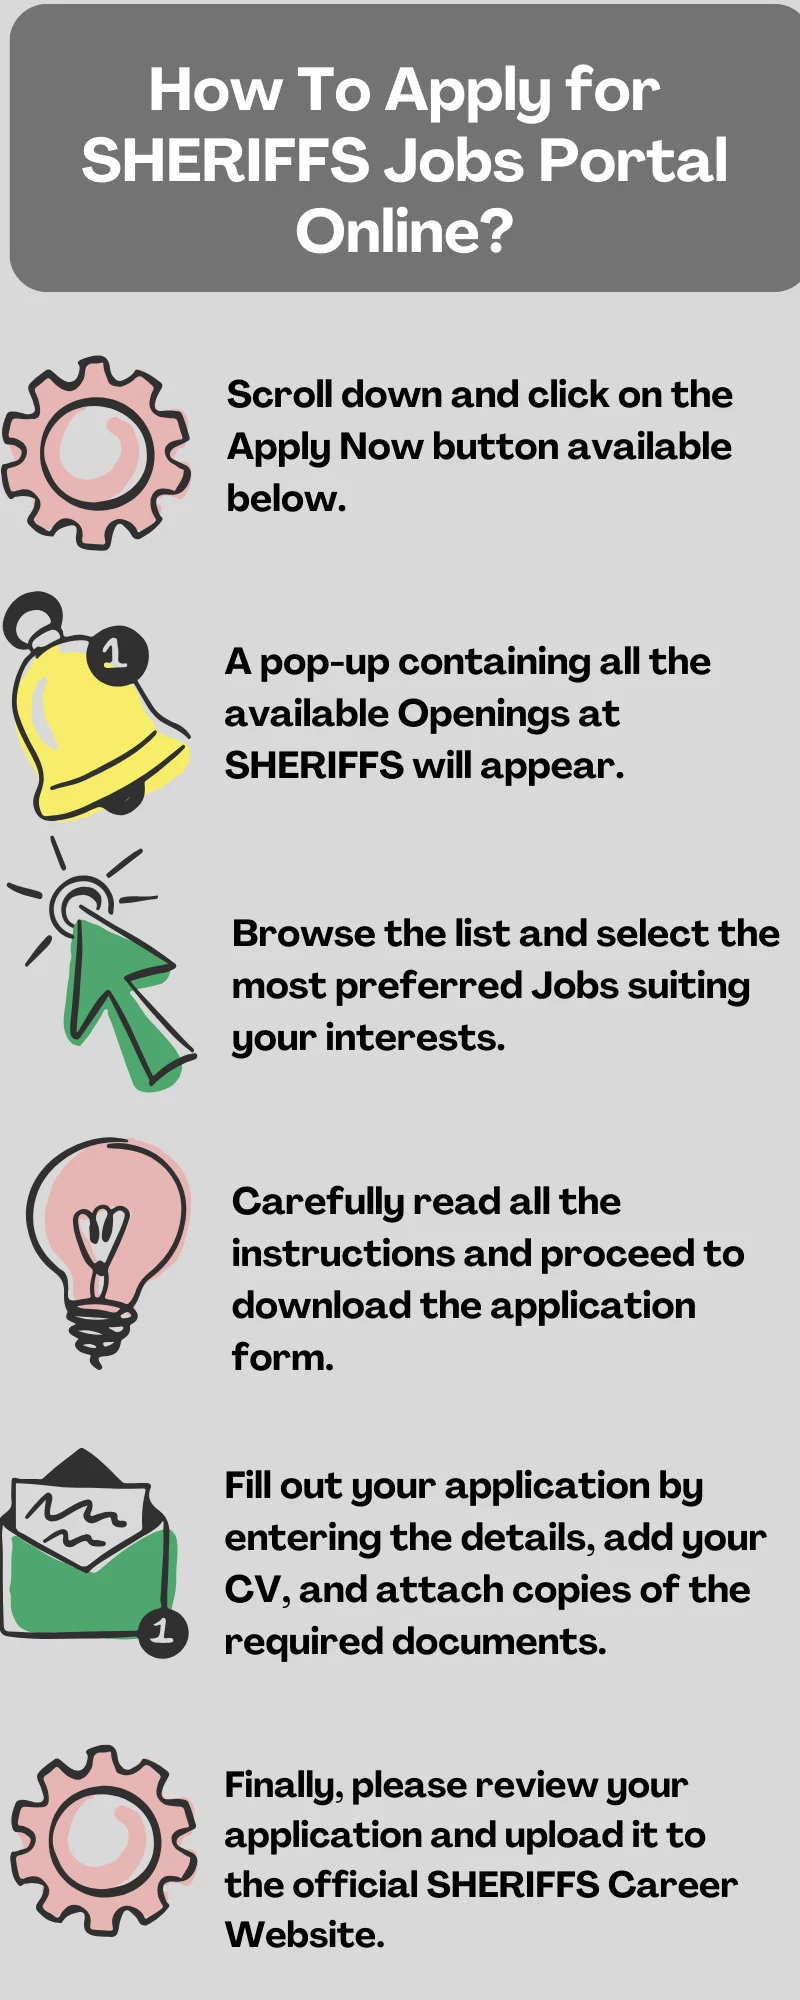 How To Apply for SHERIFFS Jobs Portal Online?